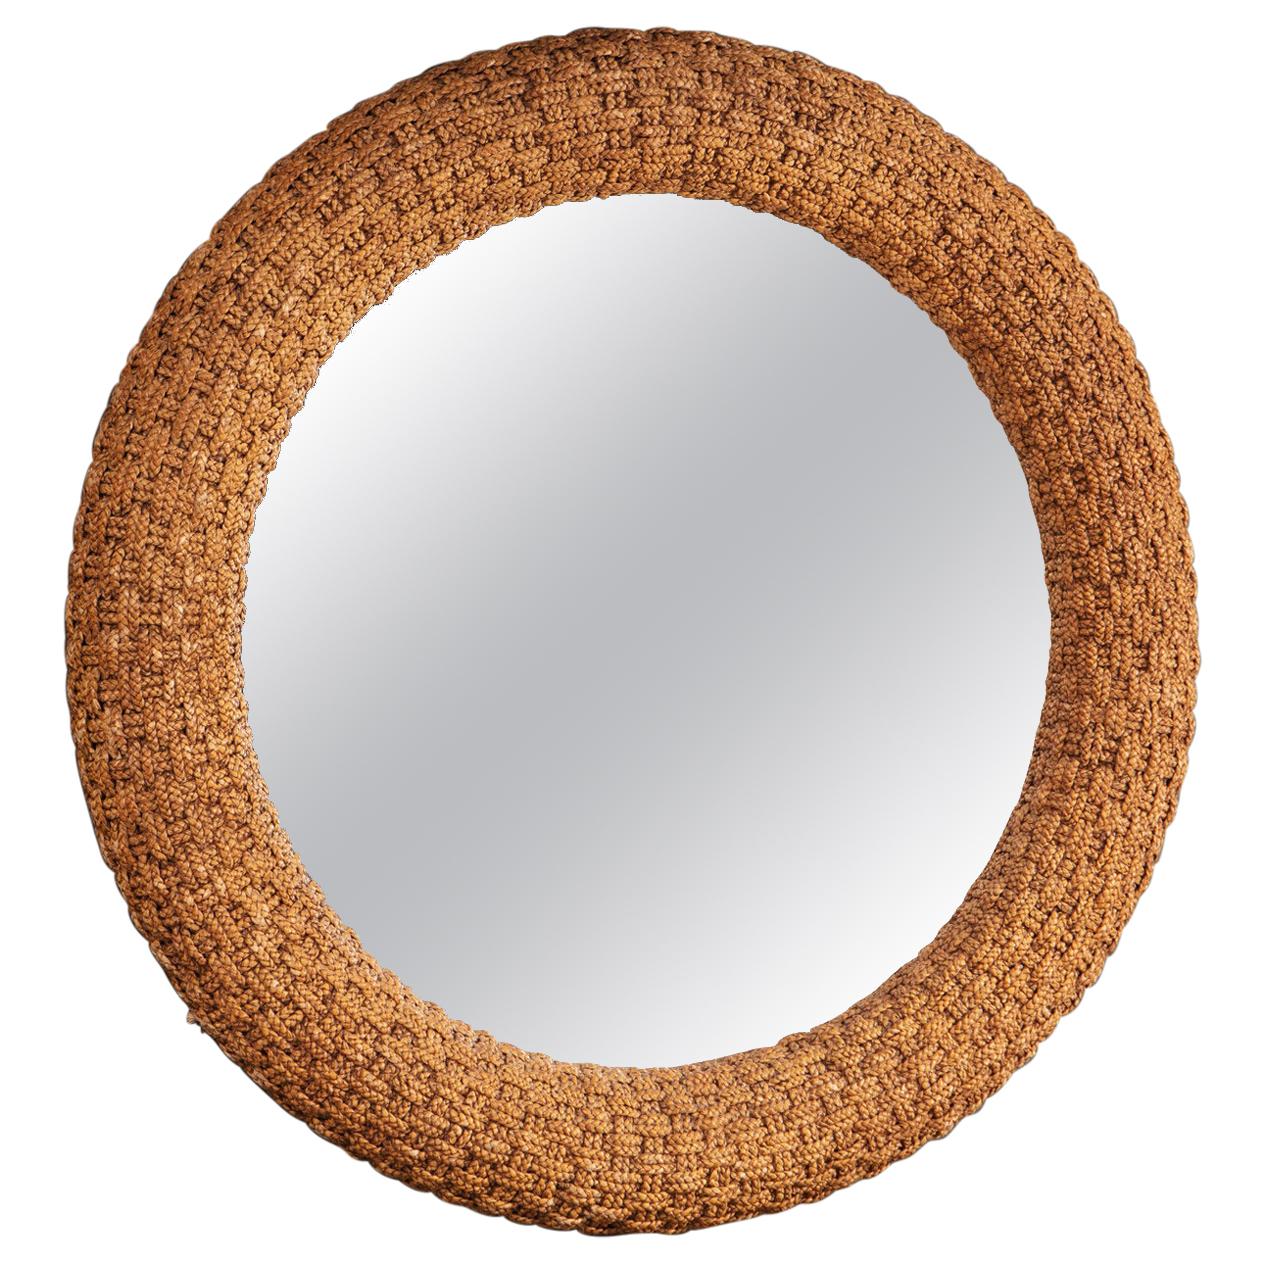 1970s Woven Rope Mirror